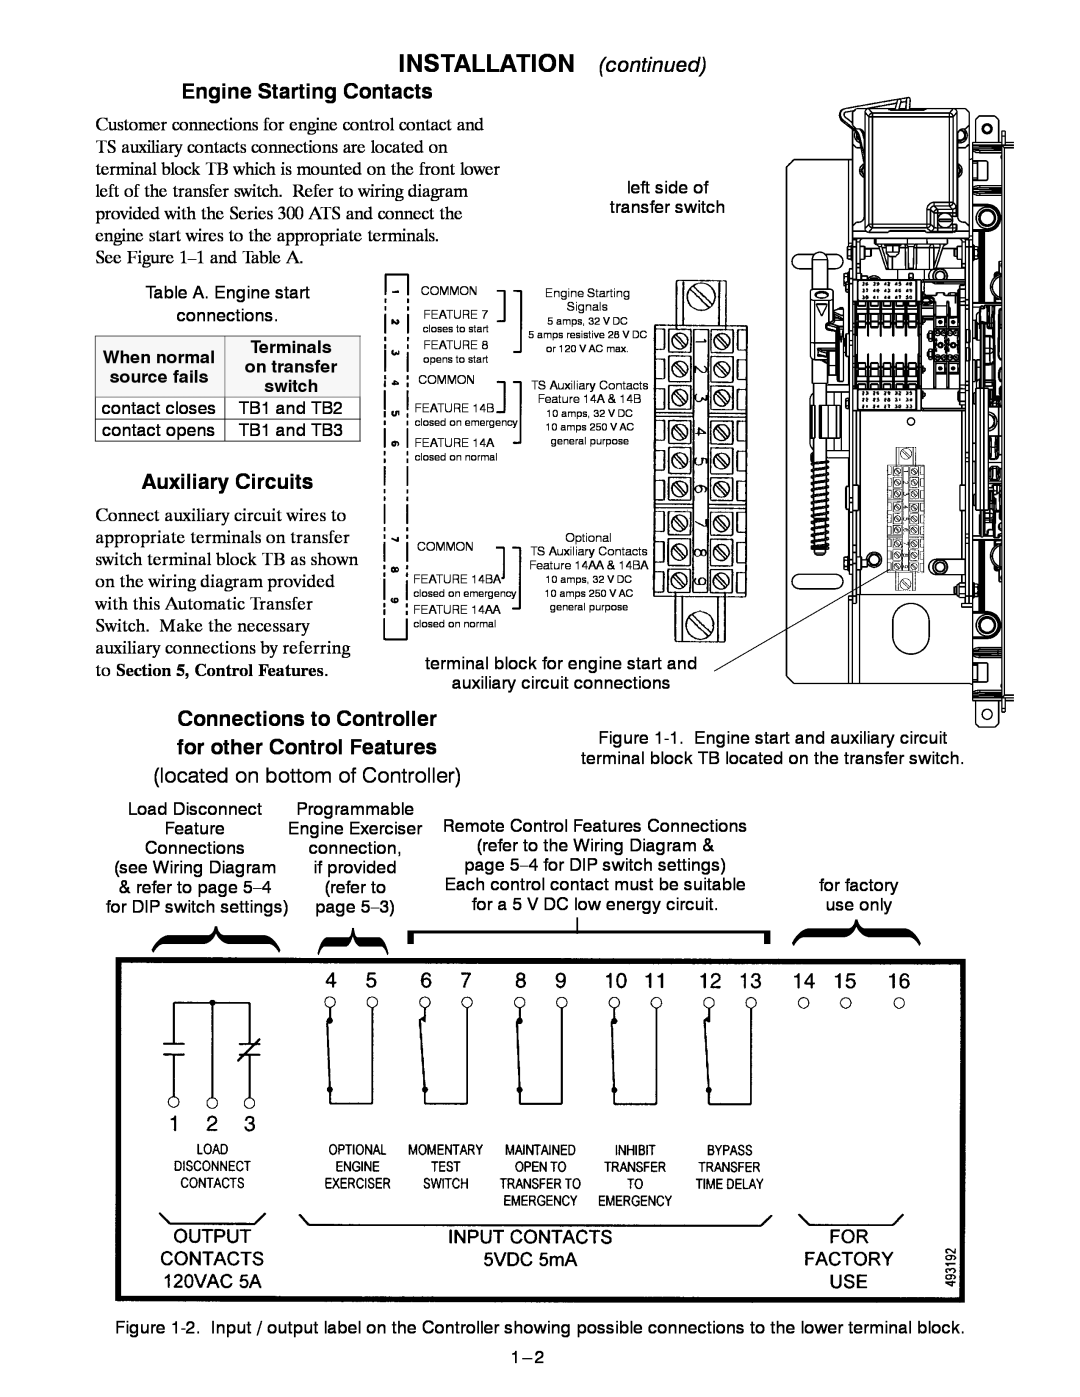 Emerson 300 manual Engine Starting Contacts, Auxiliary Circuits, Connections to Controller, located on bottom of Controller 